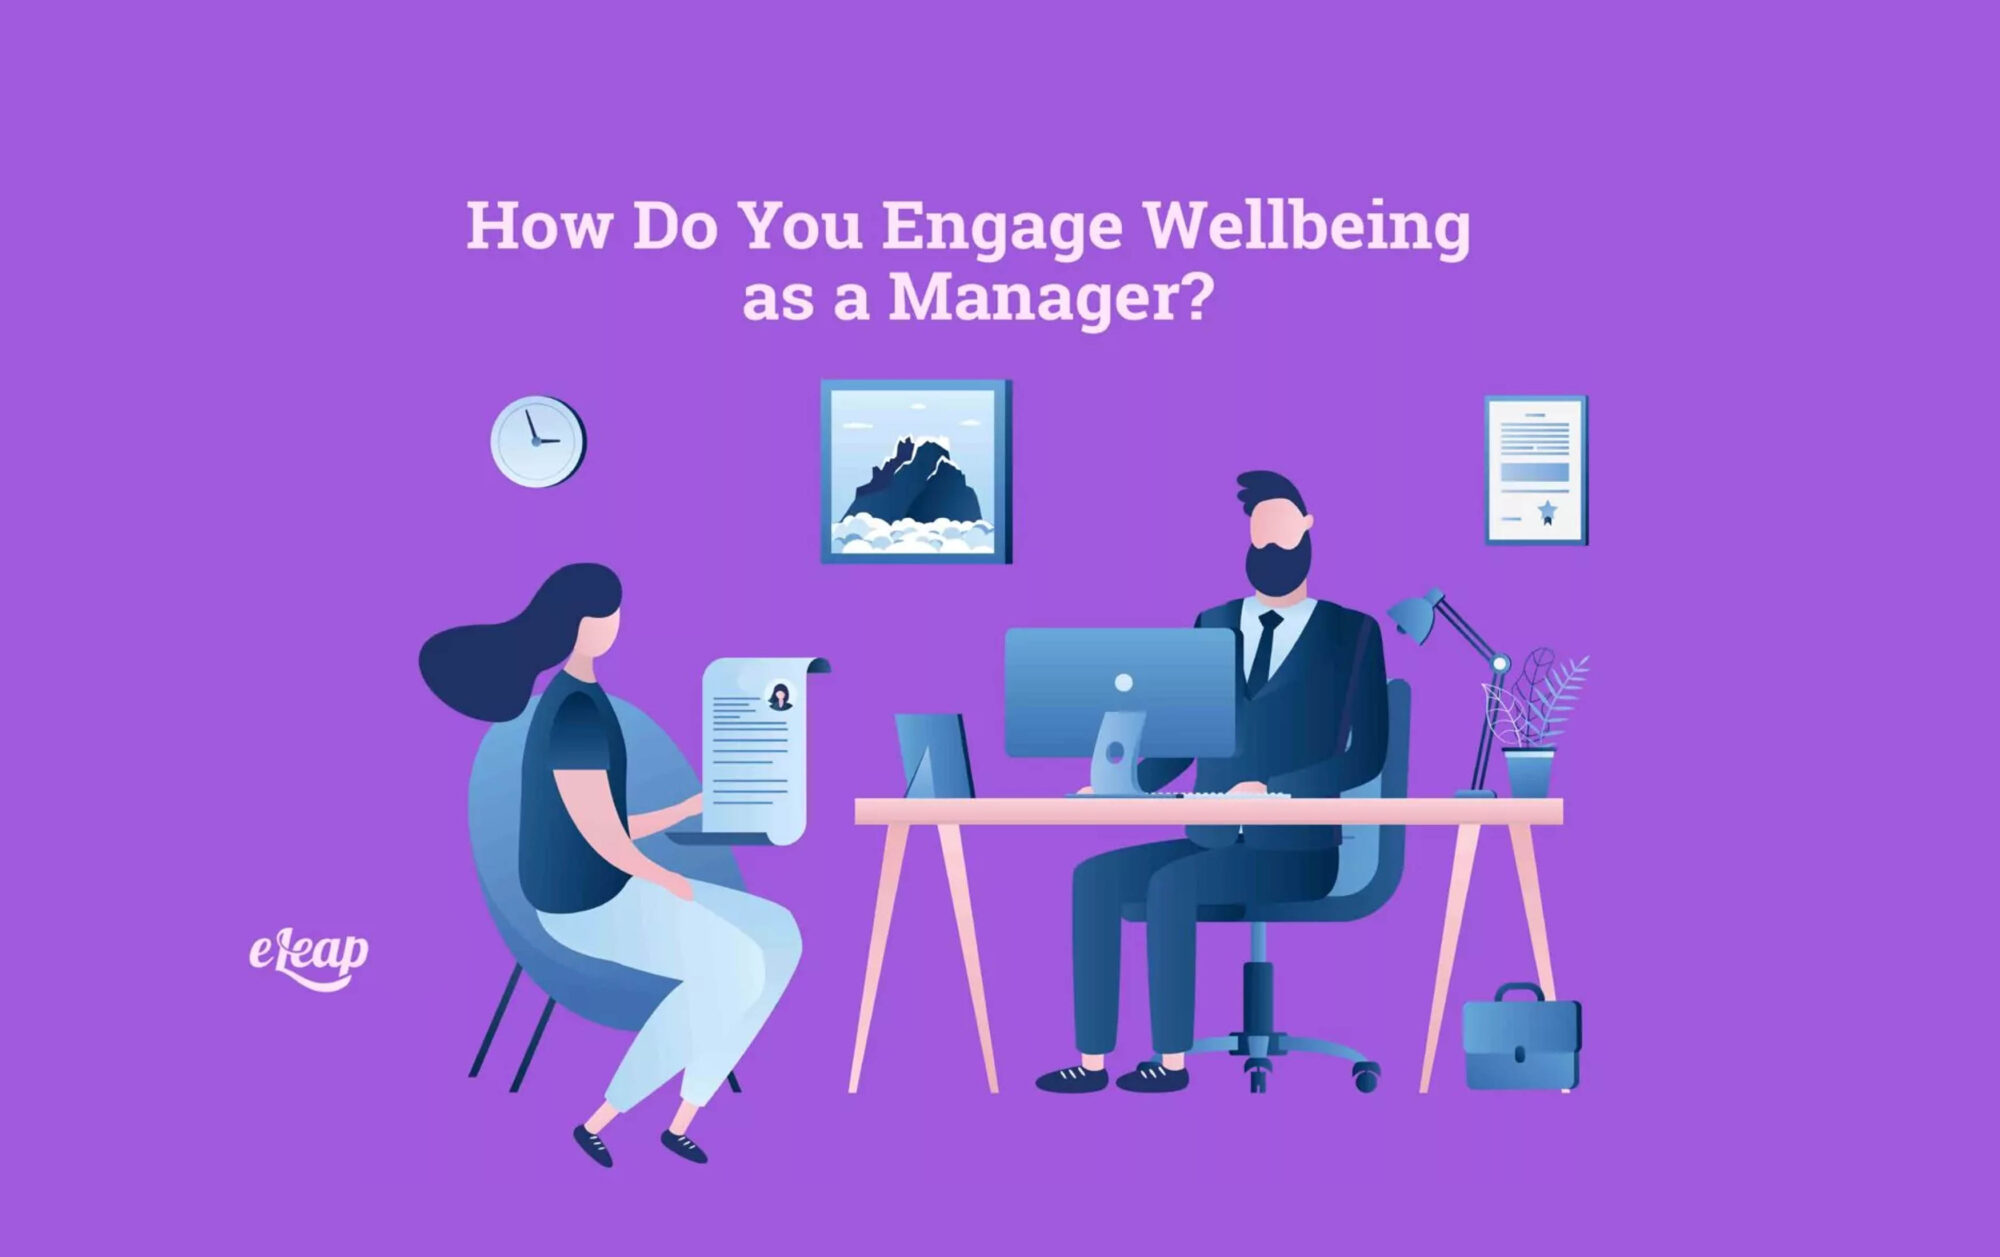 How Do You Engage Wellbeing as a Manager?